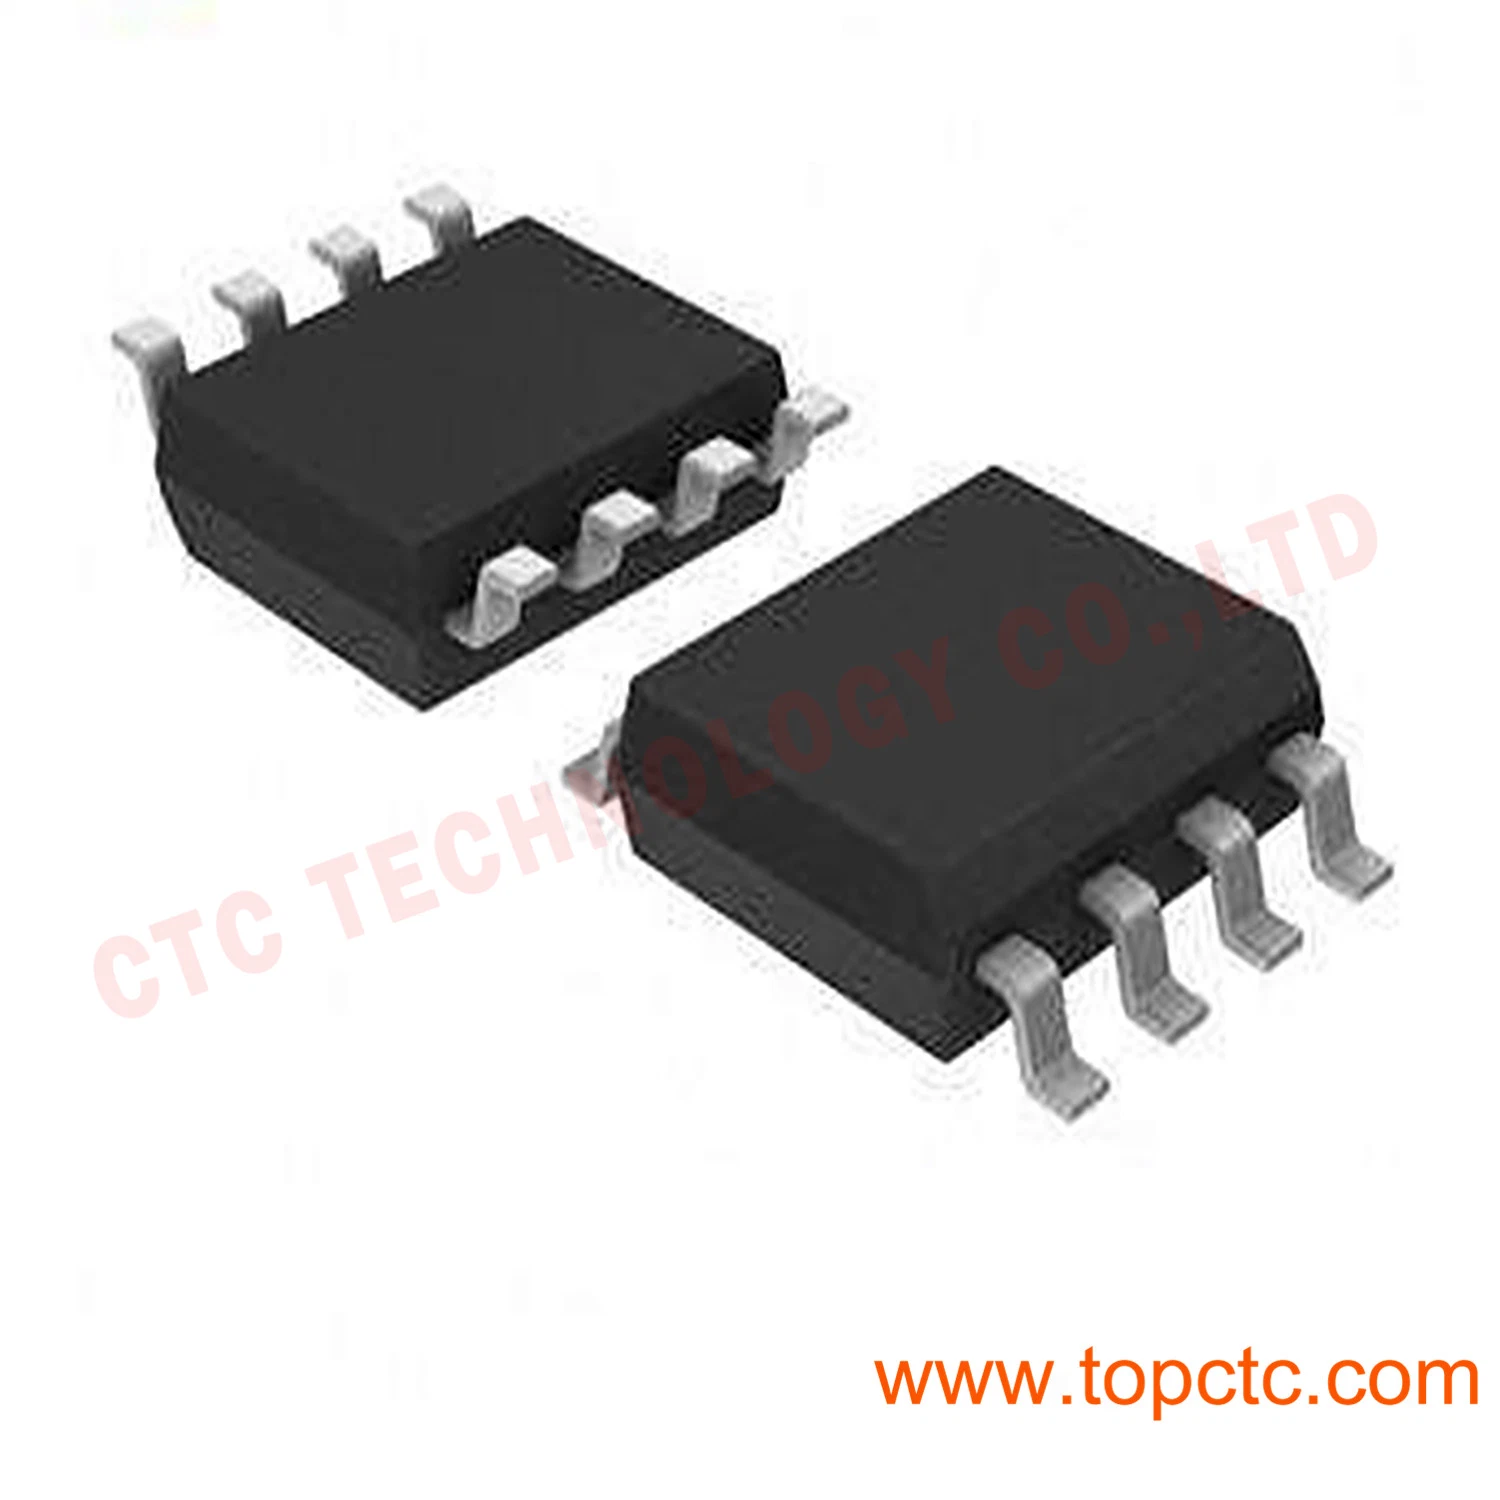 Fast Charing quick charger USB Interface selectronic component IC